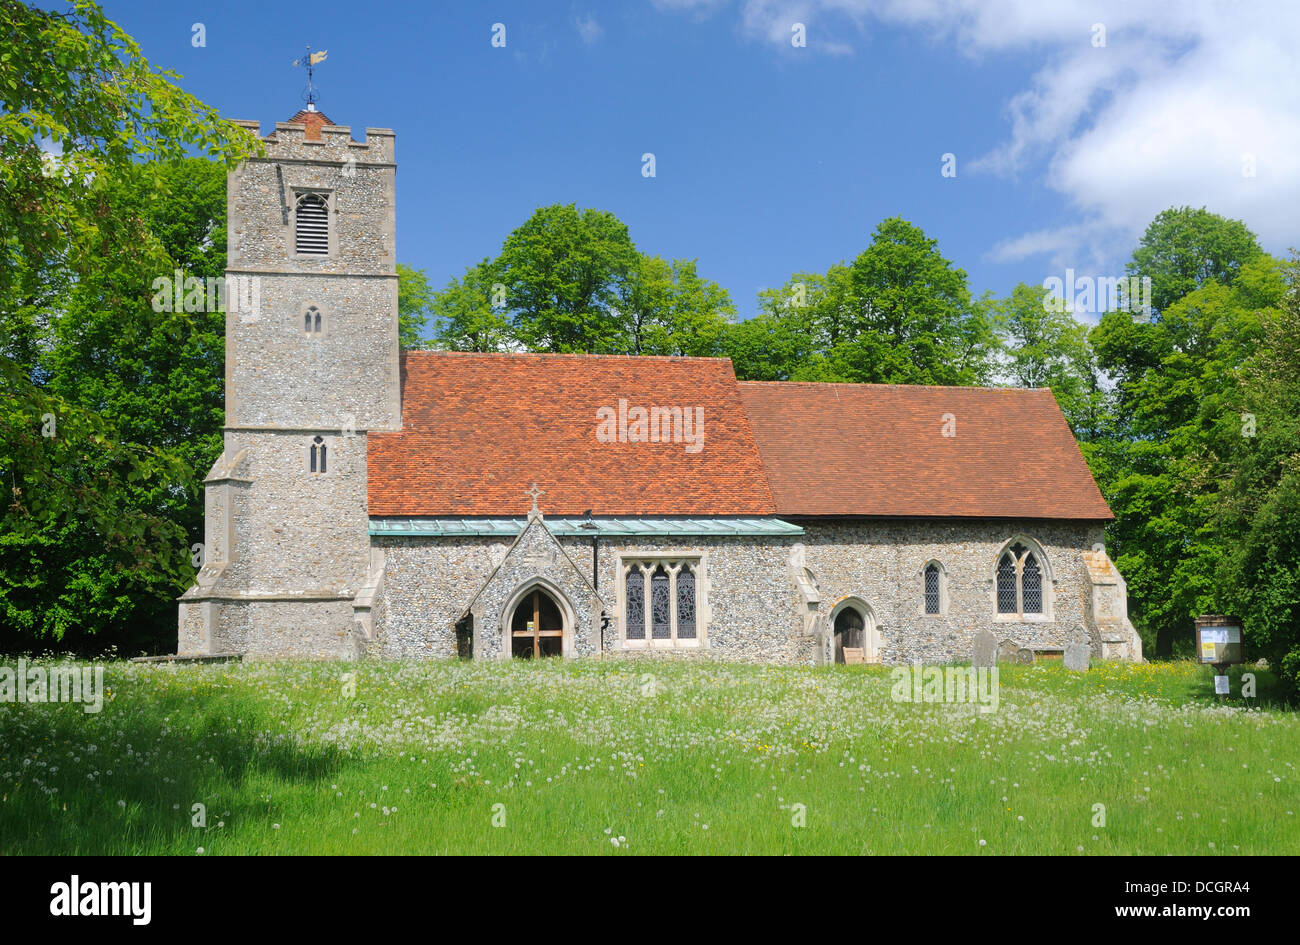 The Church of All Saints, in Rickling, Essex, England Stock Photo